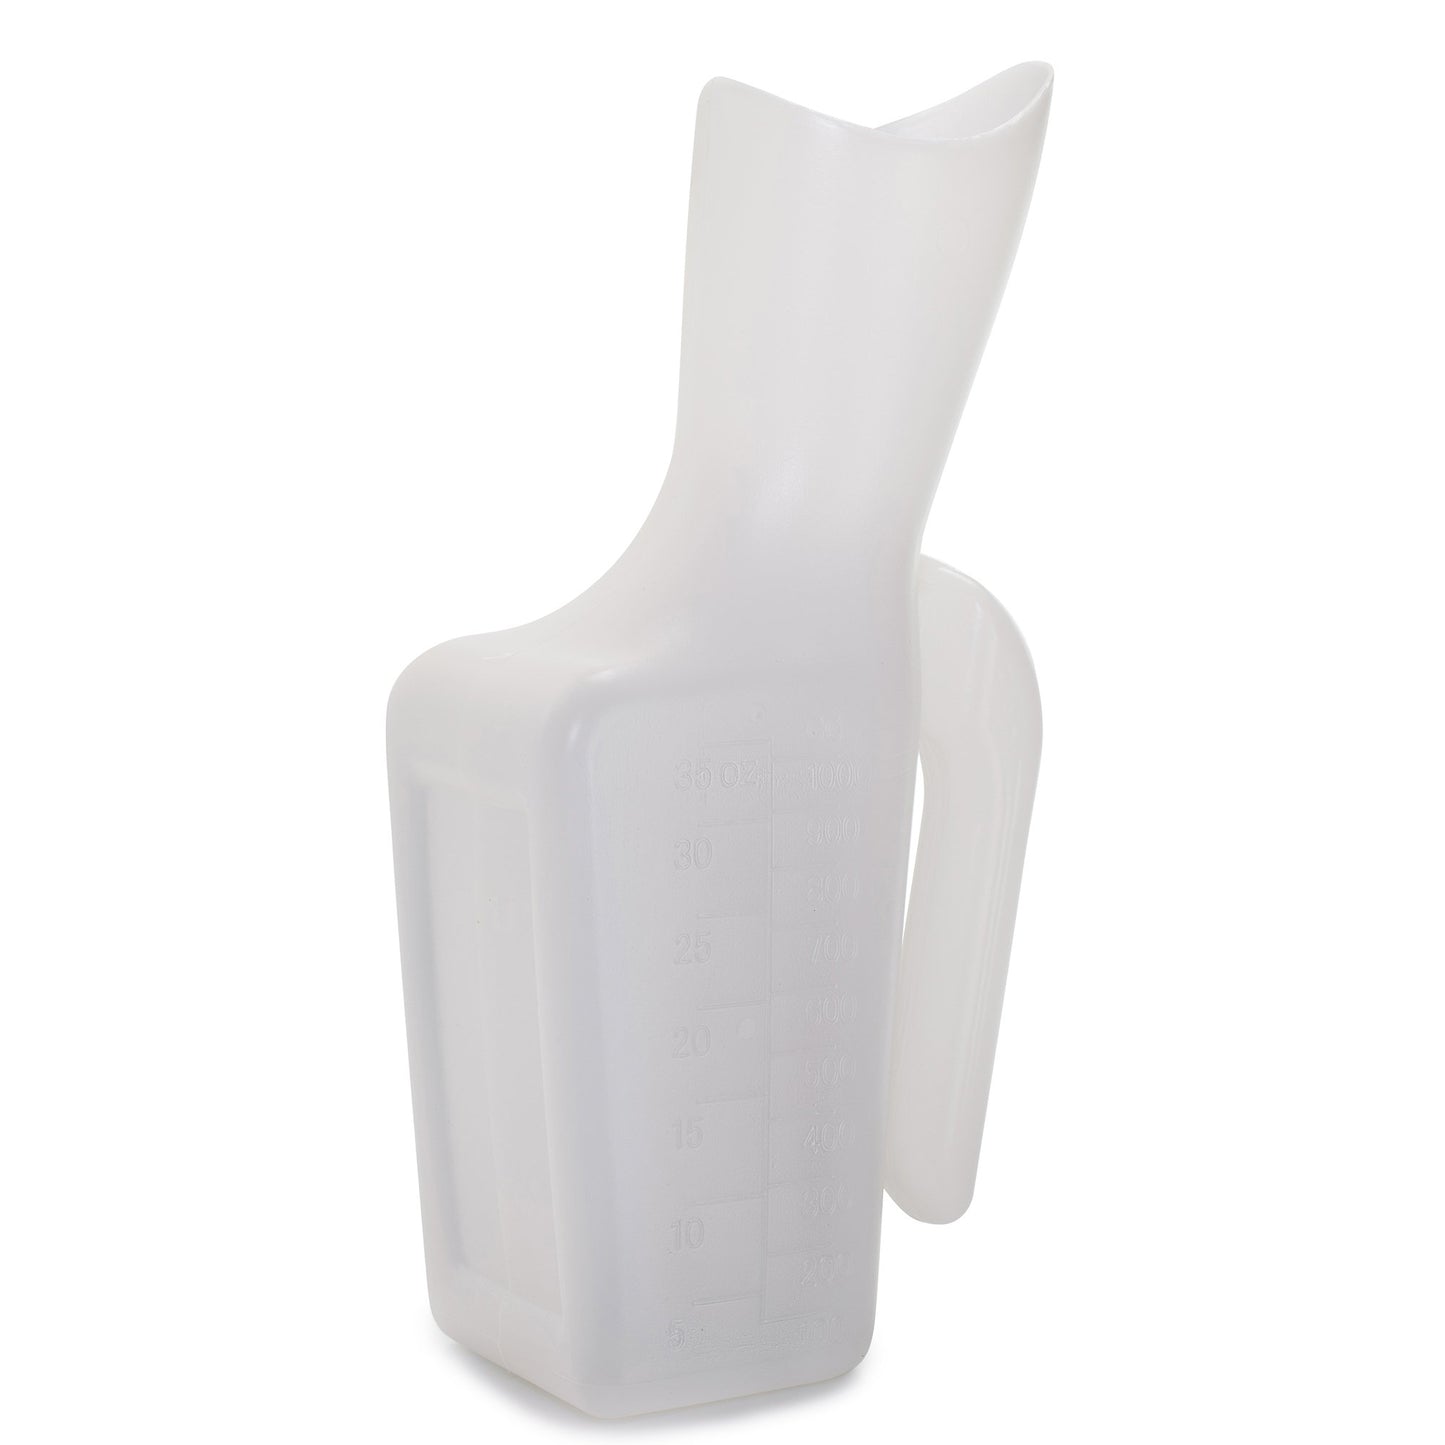 McKesson Female Urinal without Cover